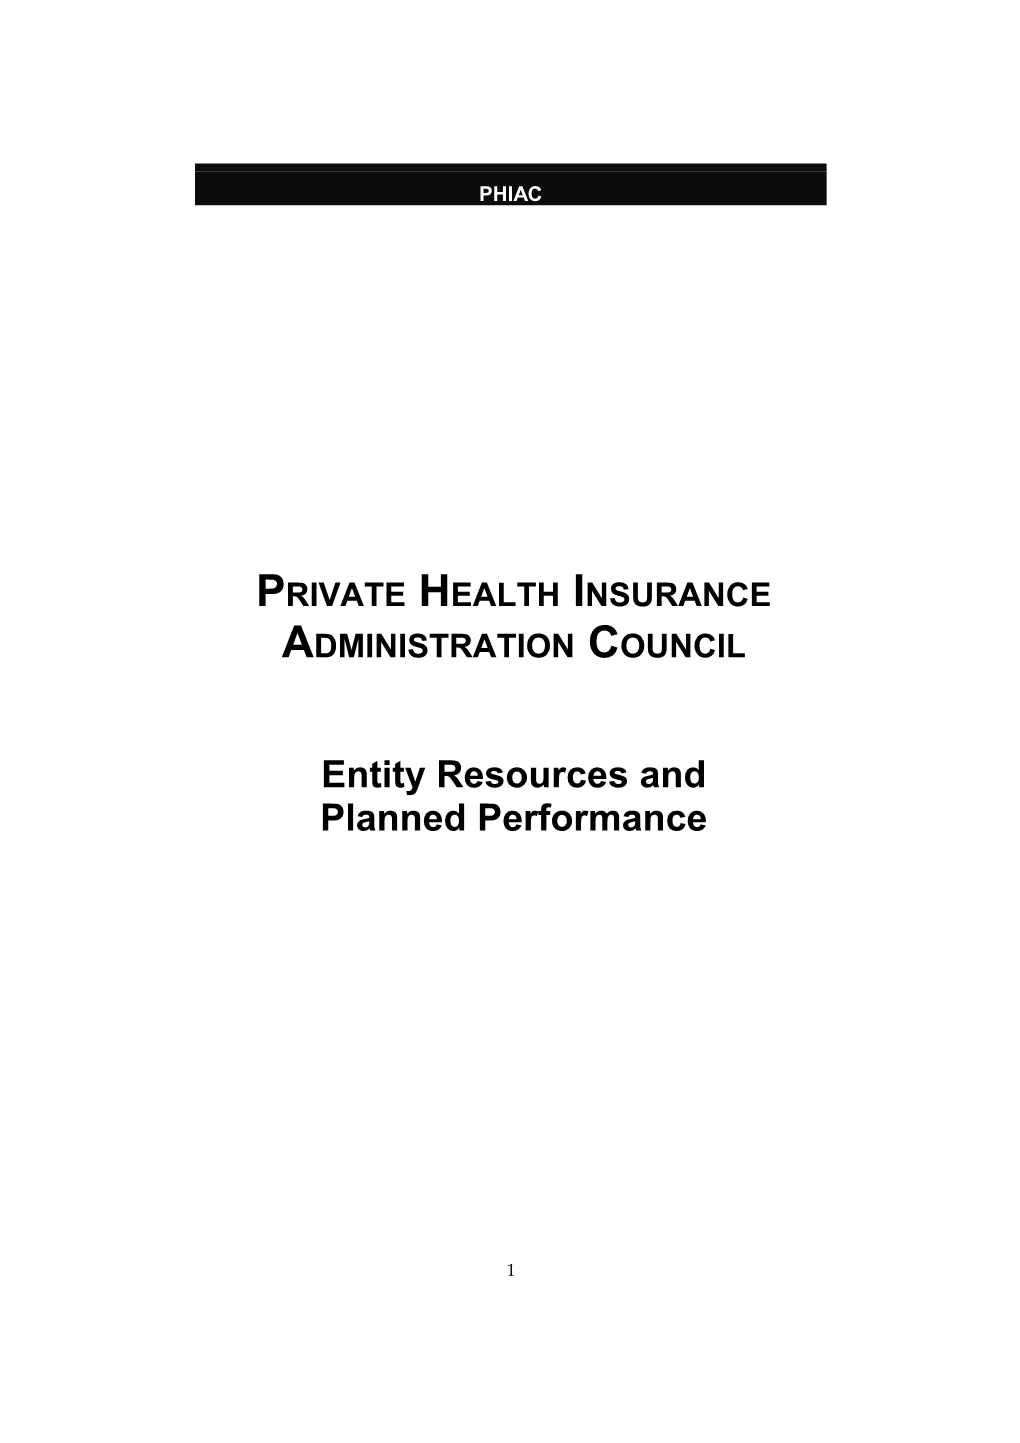 Private Health Insurance Administration Council